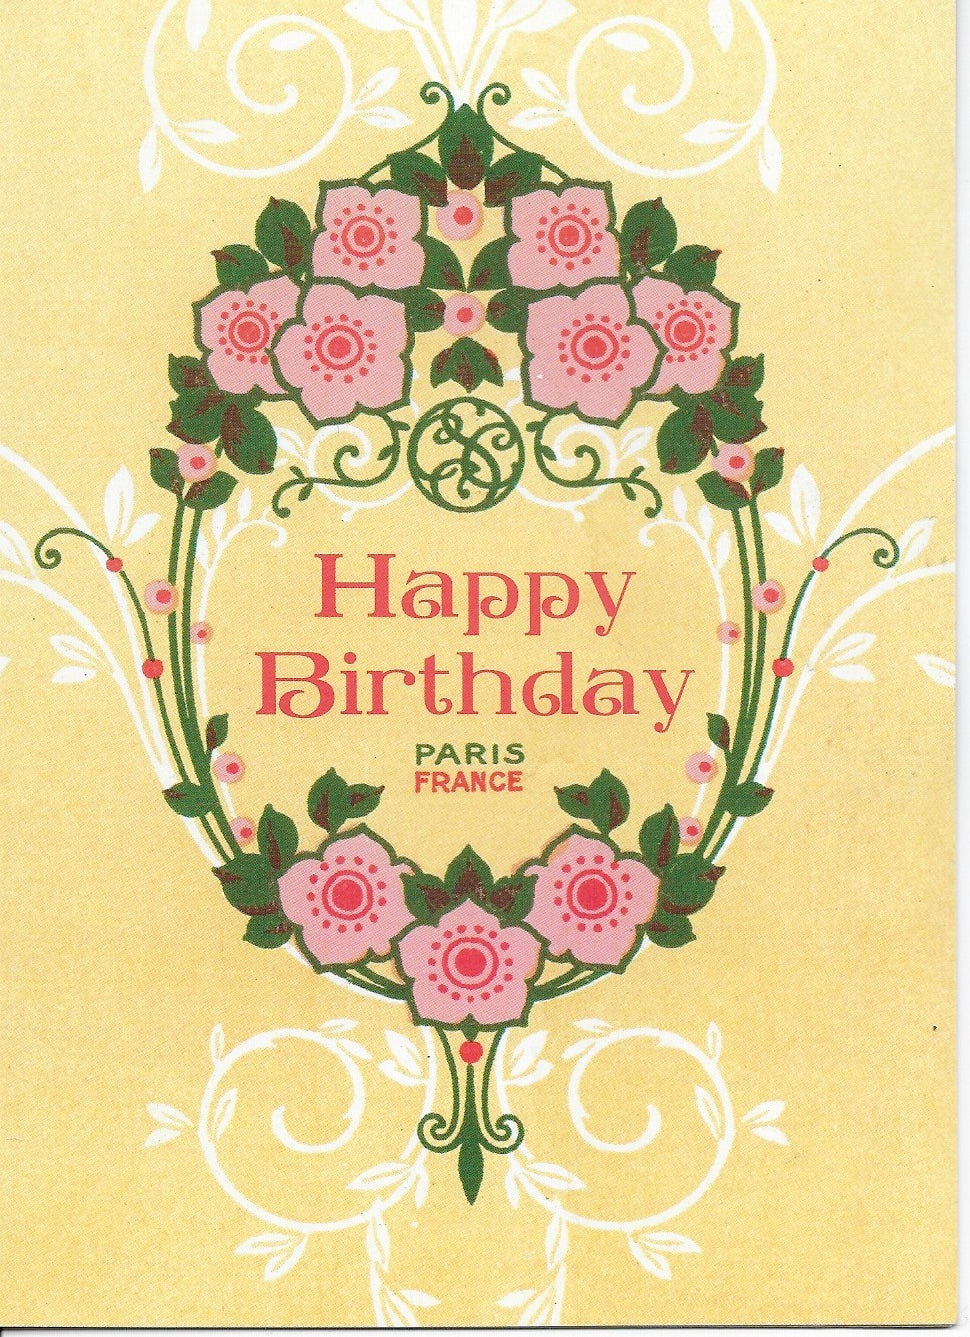 A Greeting Cards birthday greeting card with the text "happy birthday" in pink, centered in a decorative floral wreath with symmetrical roses and leaves, against a yellow background. Below the text is "Paris France".